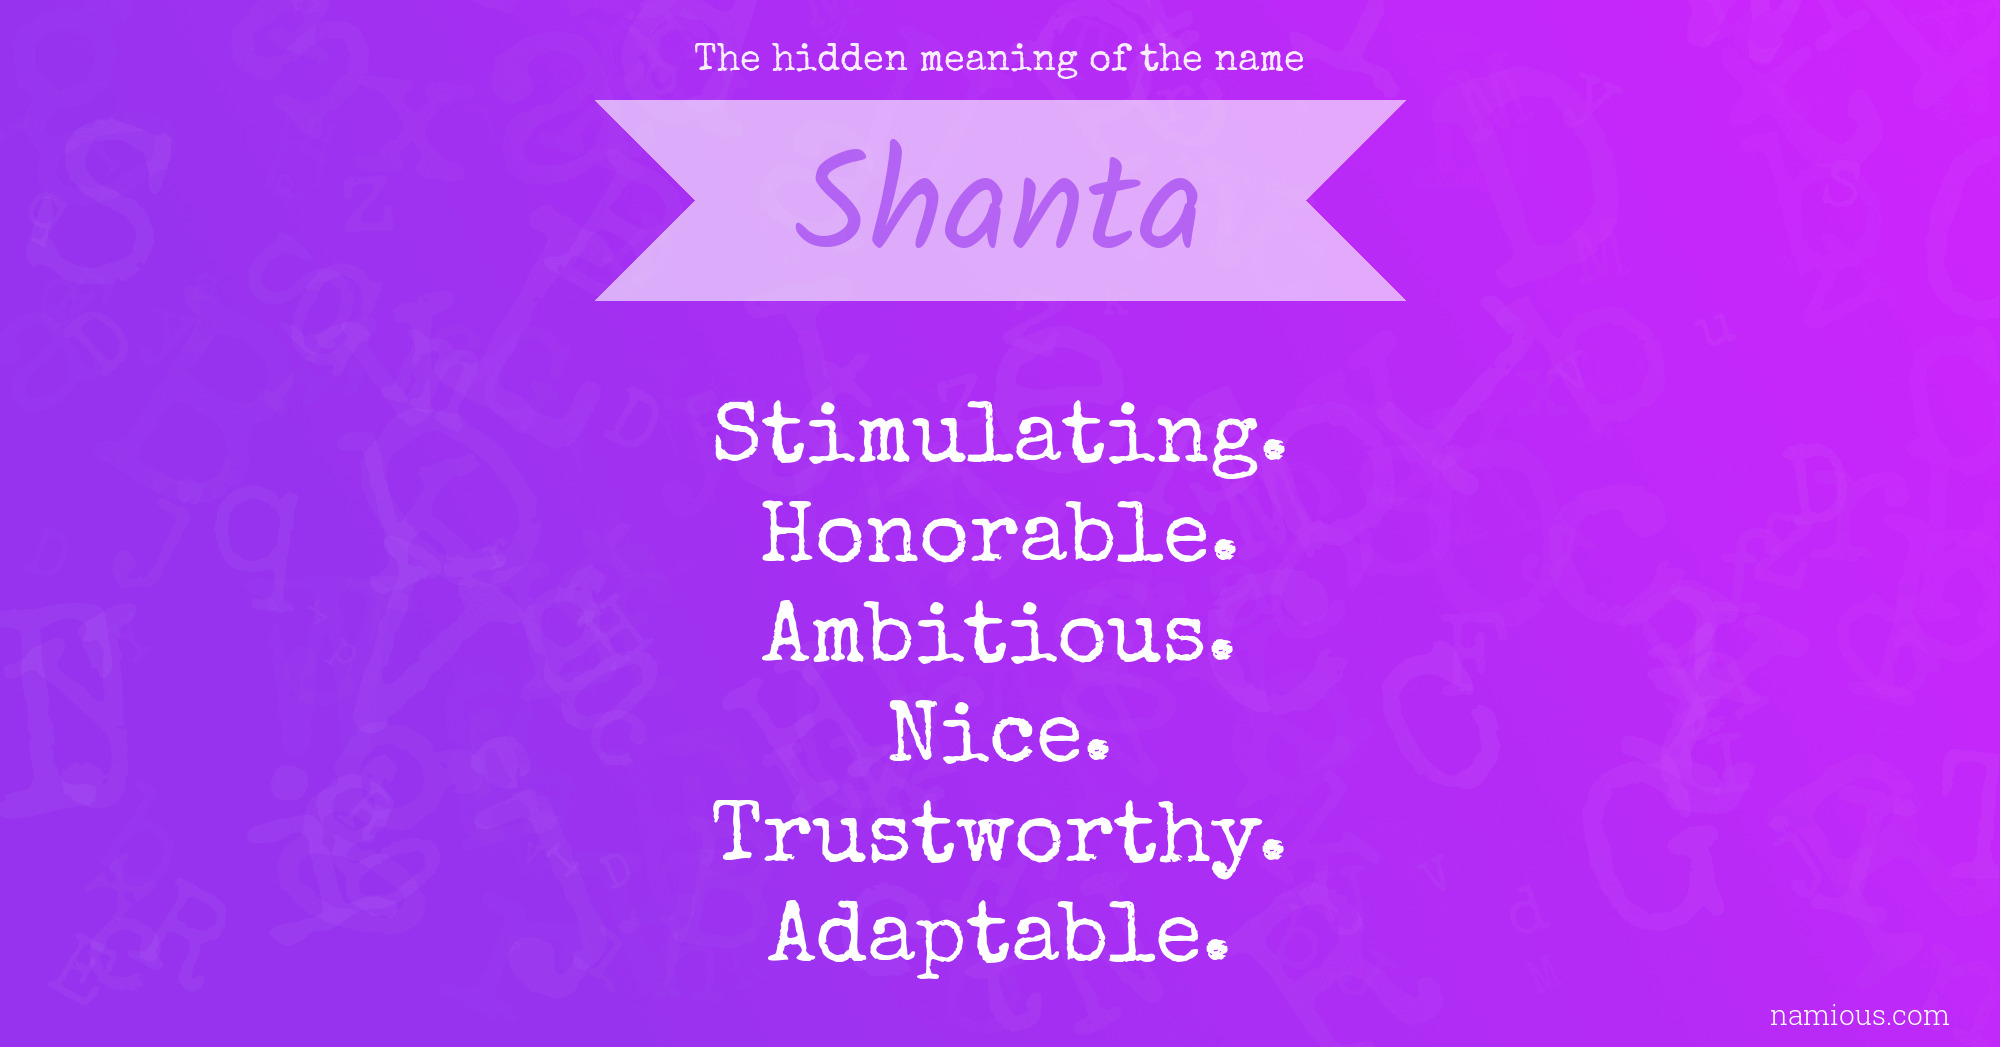 The hidden meaning of the name Shanta